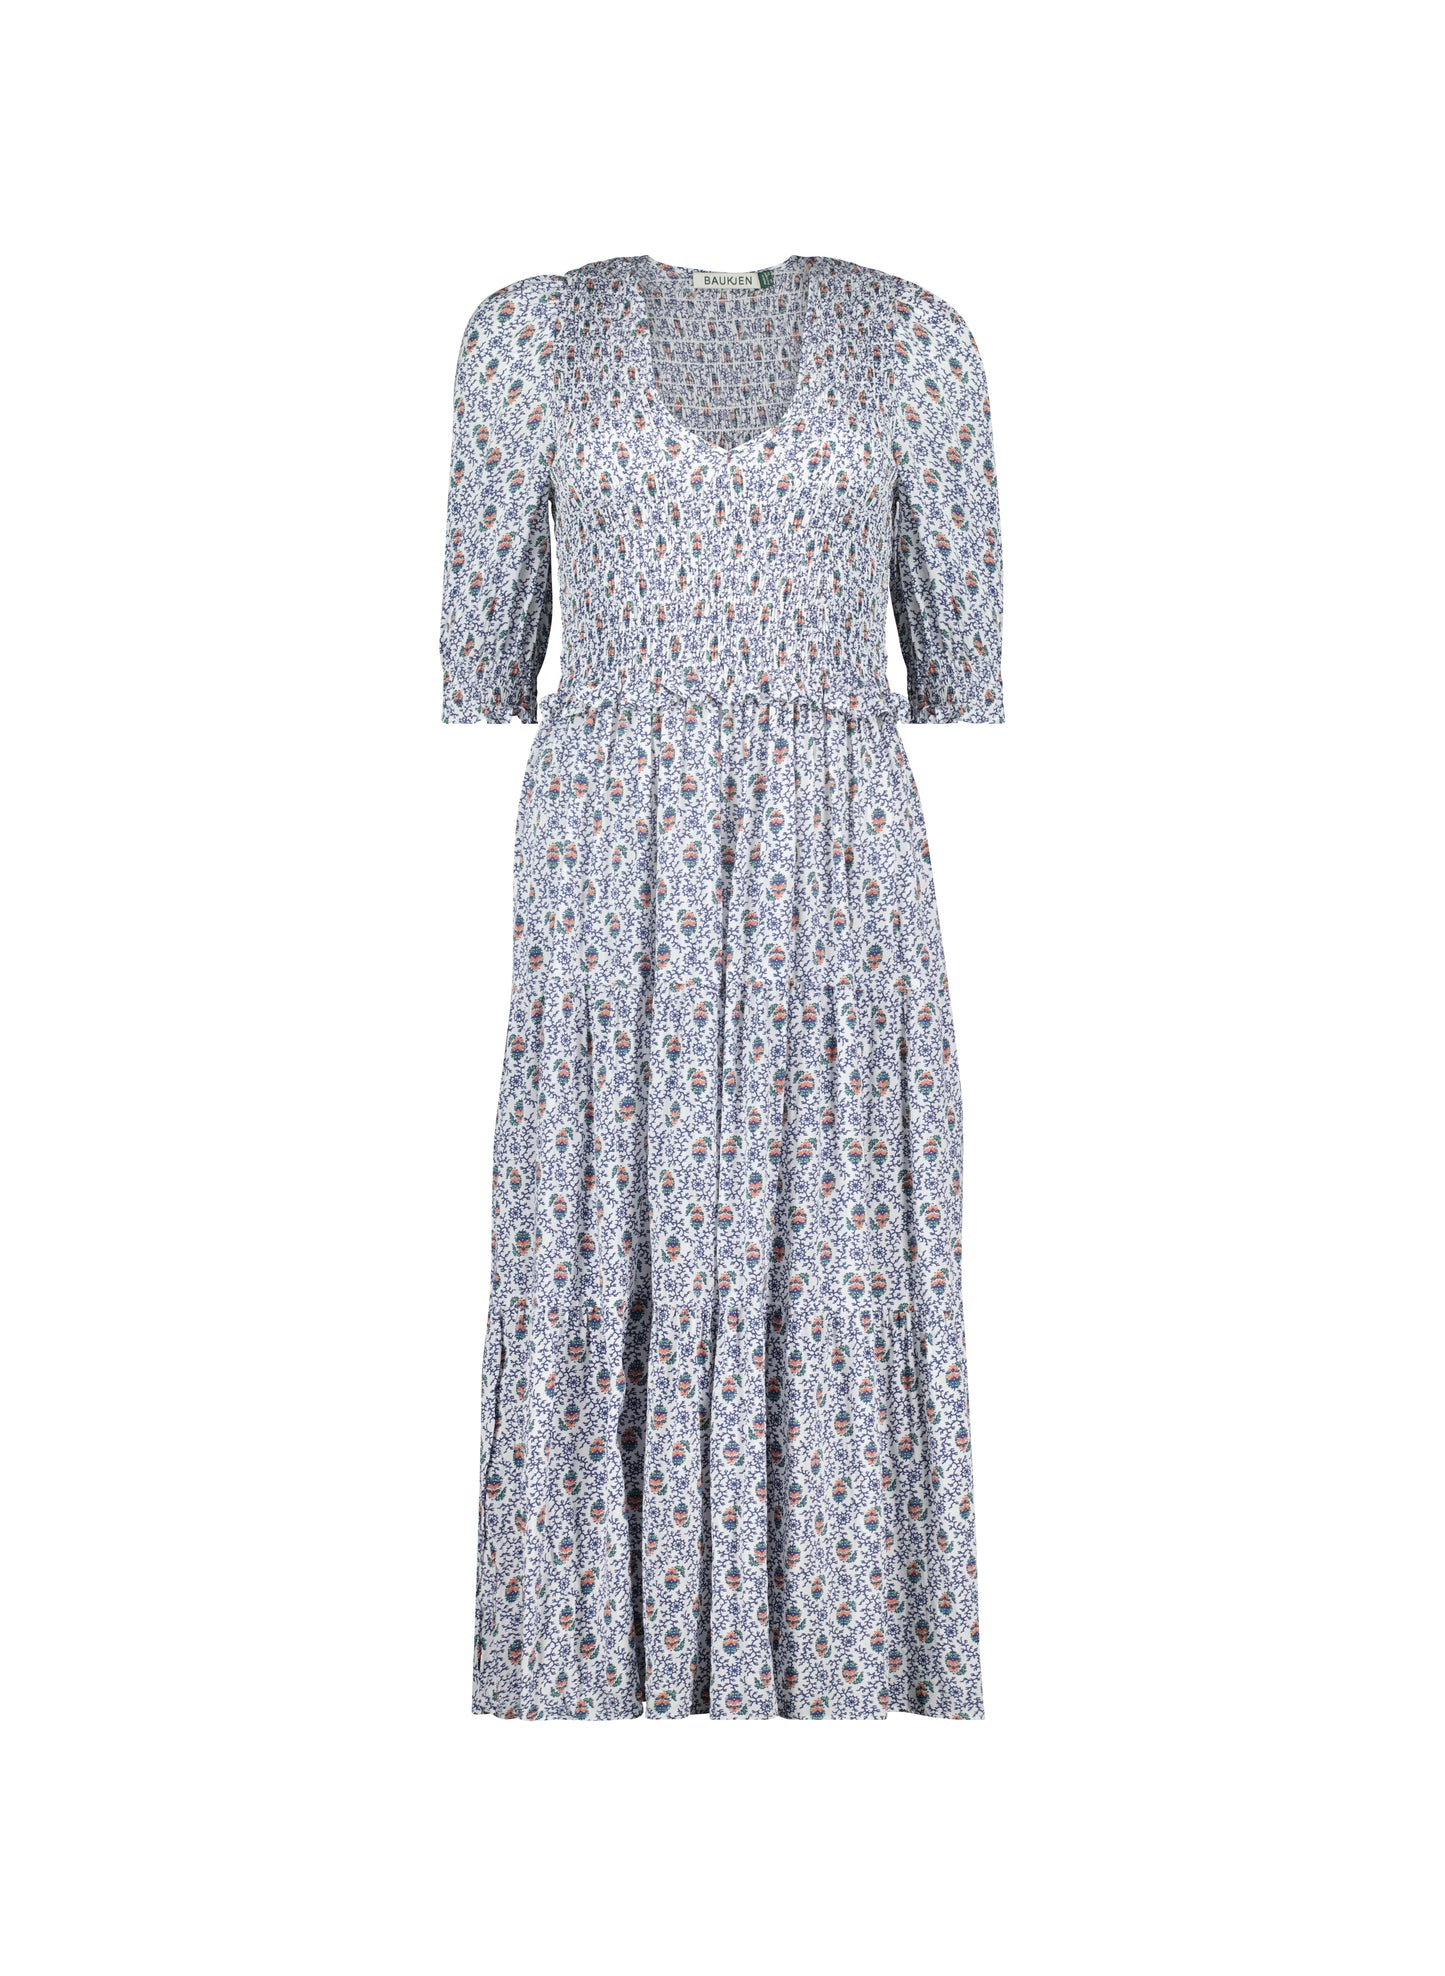 Pre-Loved Florence Dress with LENZING™ ECOVERO™